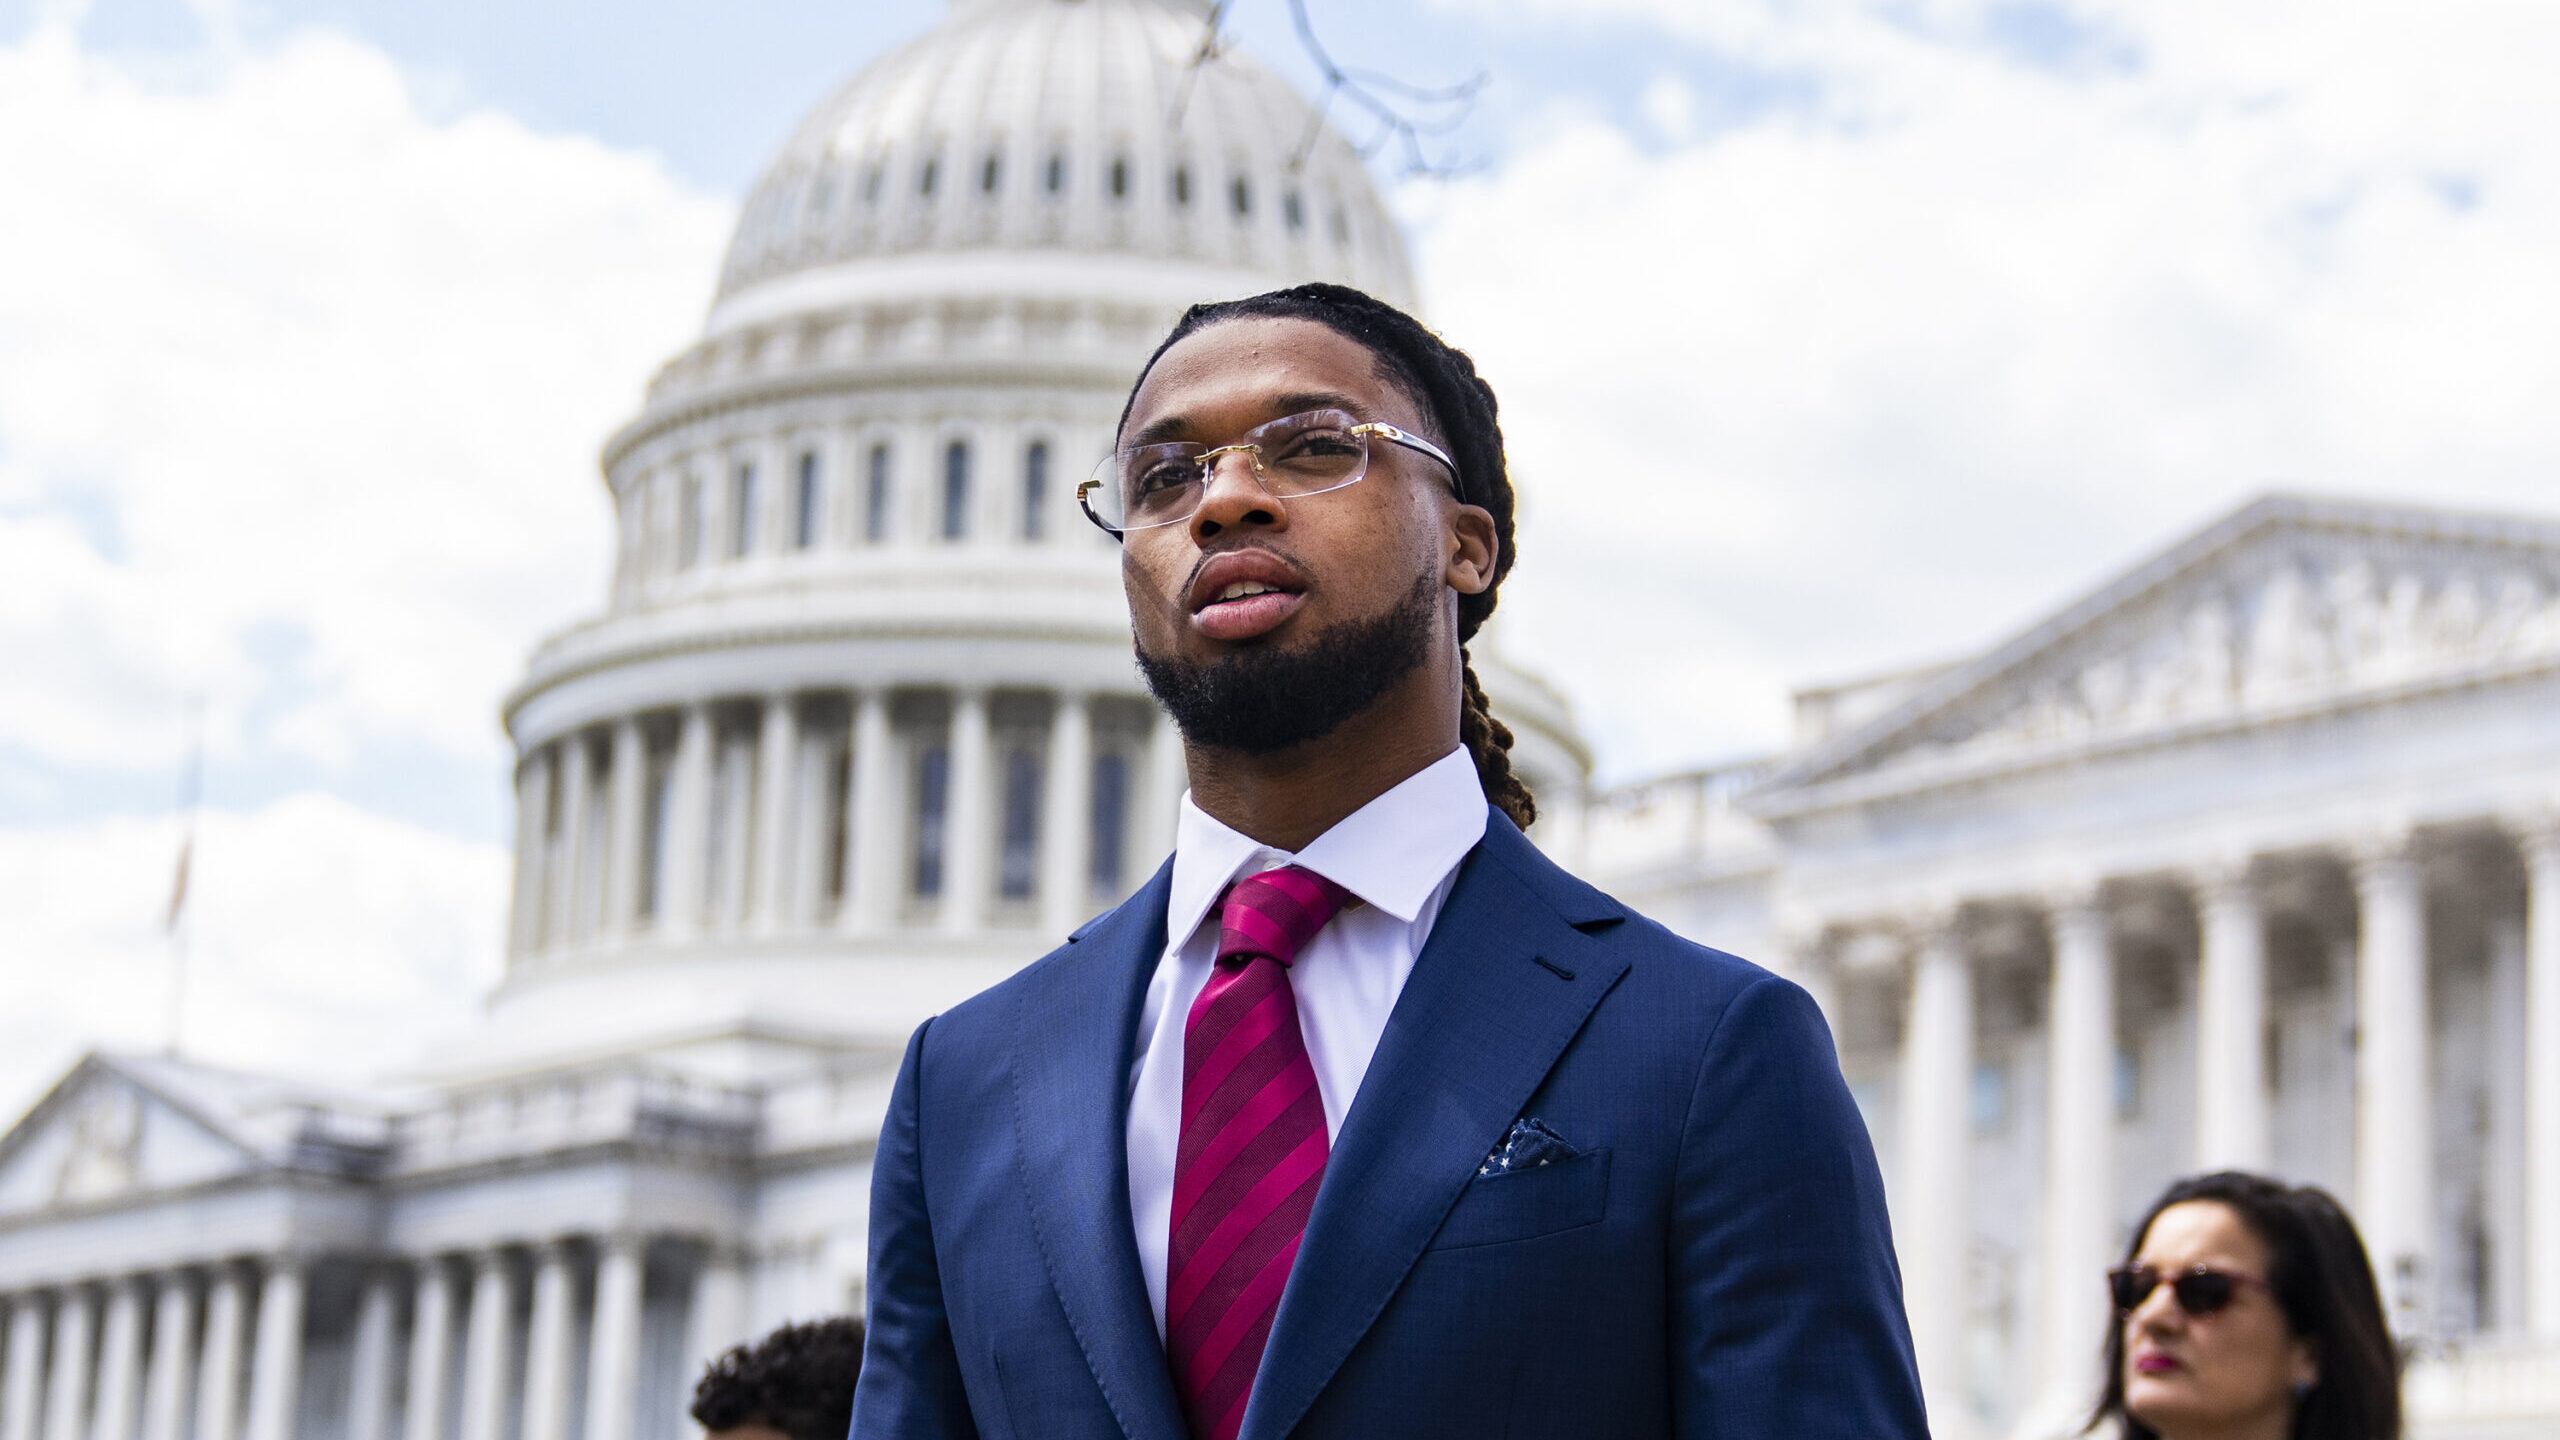 Buffalo Bills safety Damar Hamlin spoke on Capitol Hill on March 29 in support of the Access to AED...